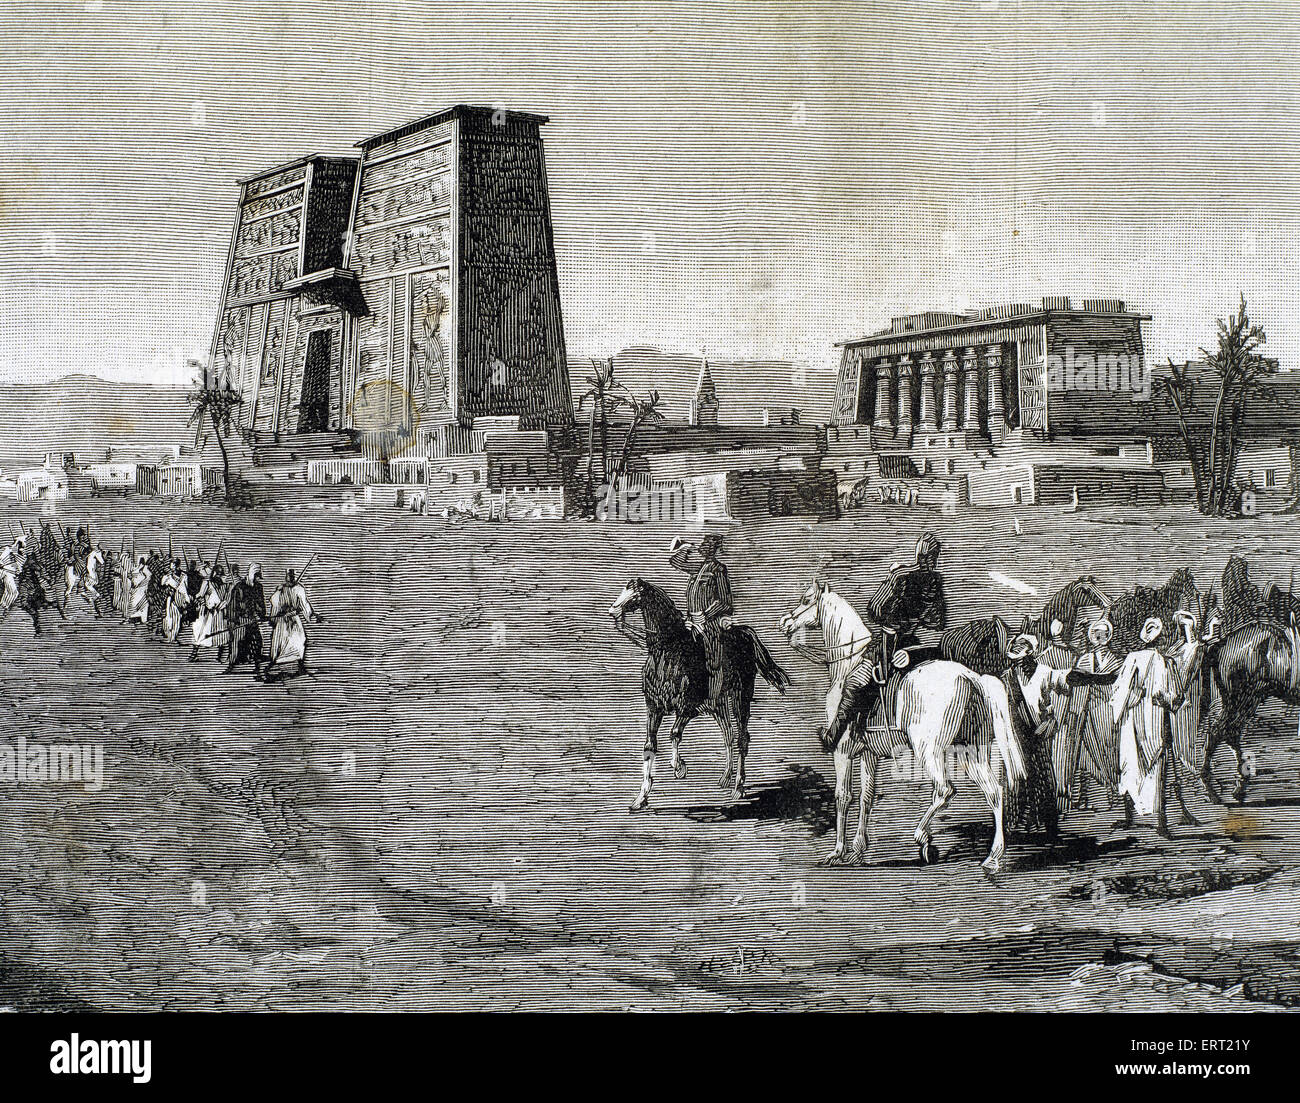 Anglo-Egyptian War (1882). Emissaries of Arabi Pasha recruiting soldiers among the tribes to fight the British army. In the background, the Temple of Edfu. Engraving, 1882. Stock Photo